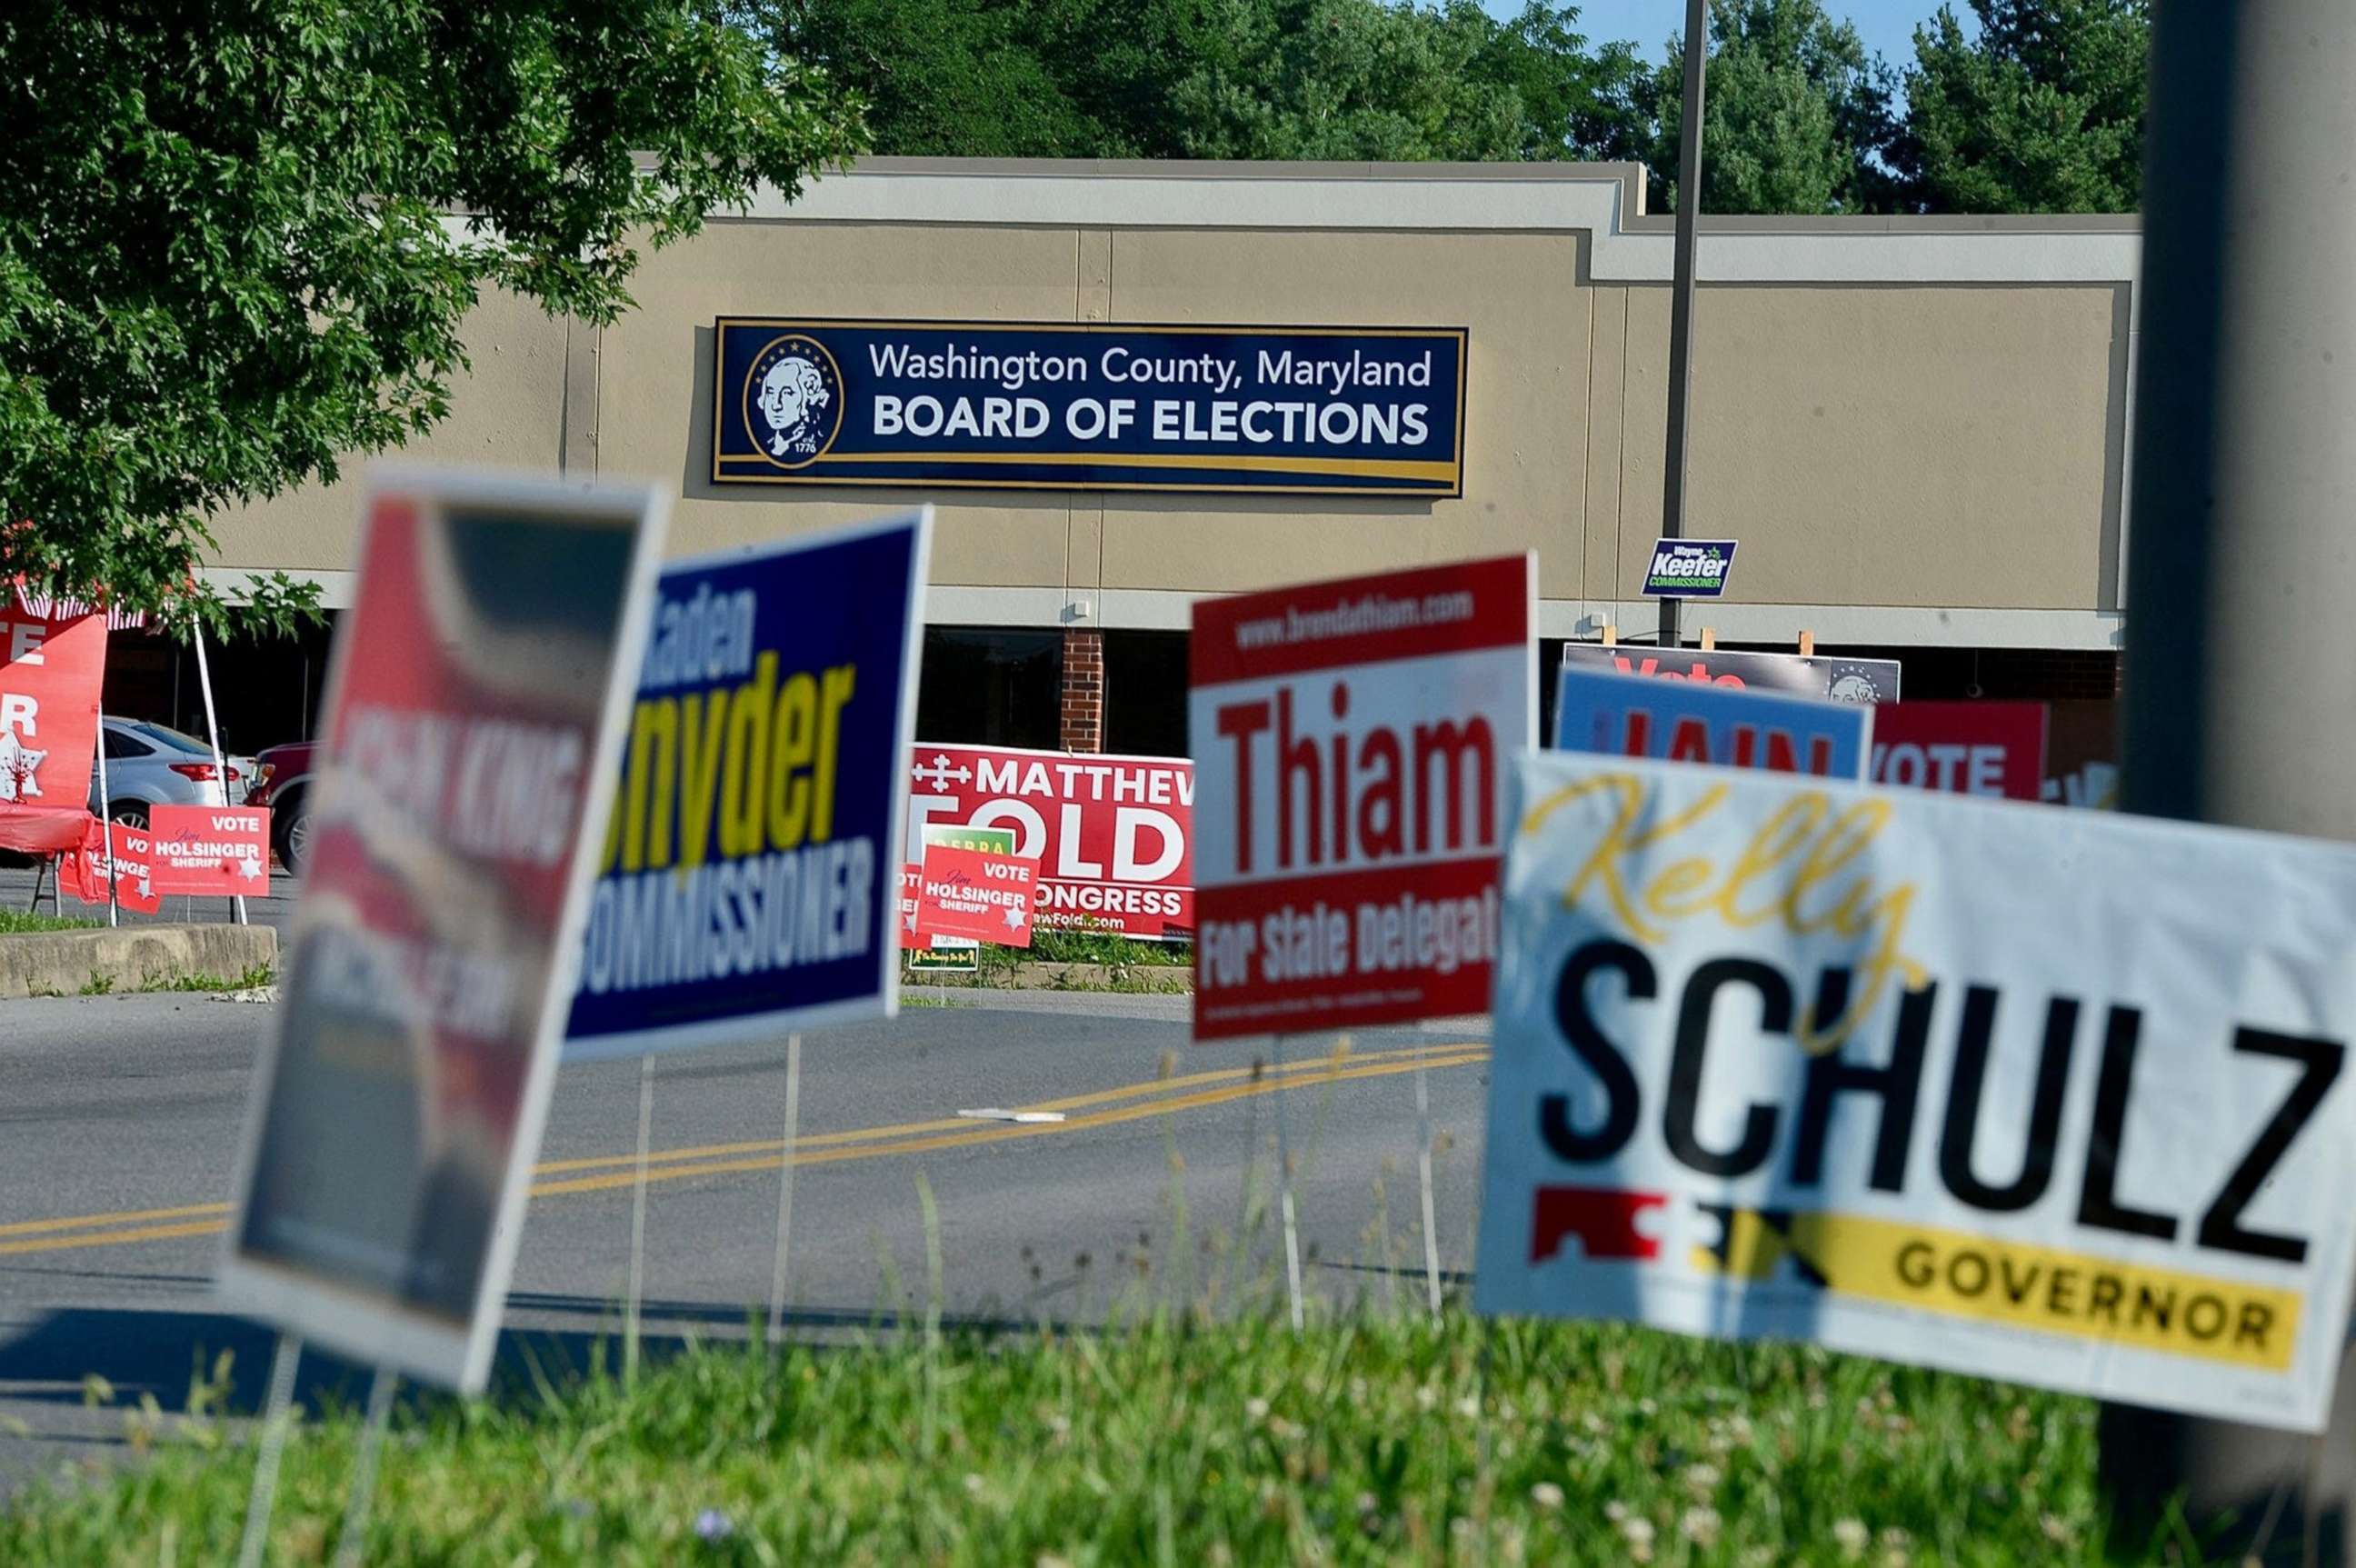 PHOTO: Campaign signs stand along the entrance to the polling place at the Washington County Board of Elections in Hagerstown Md., July 19, 2022.